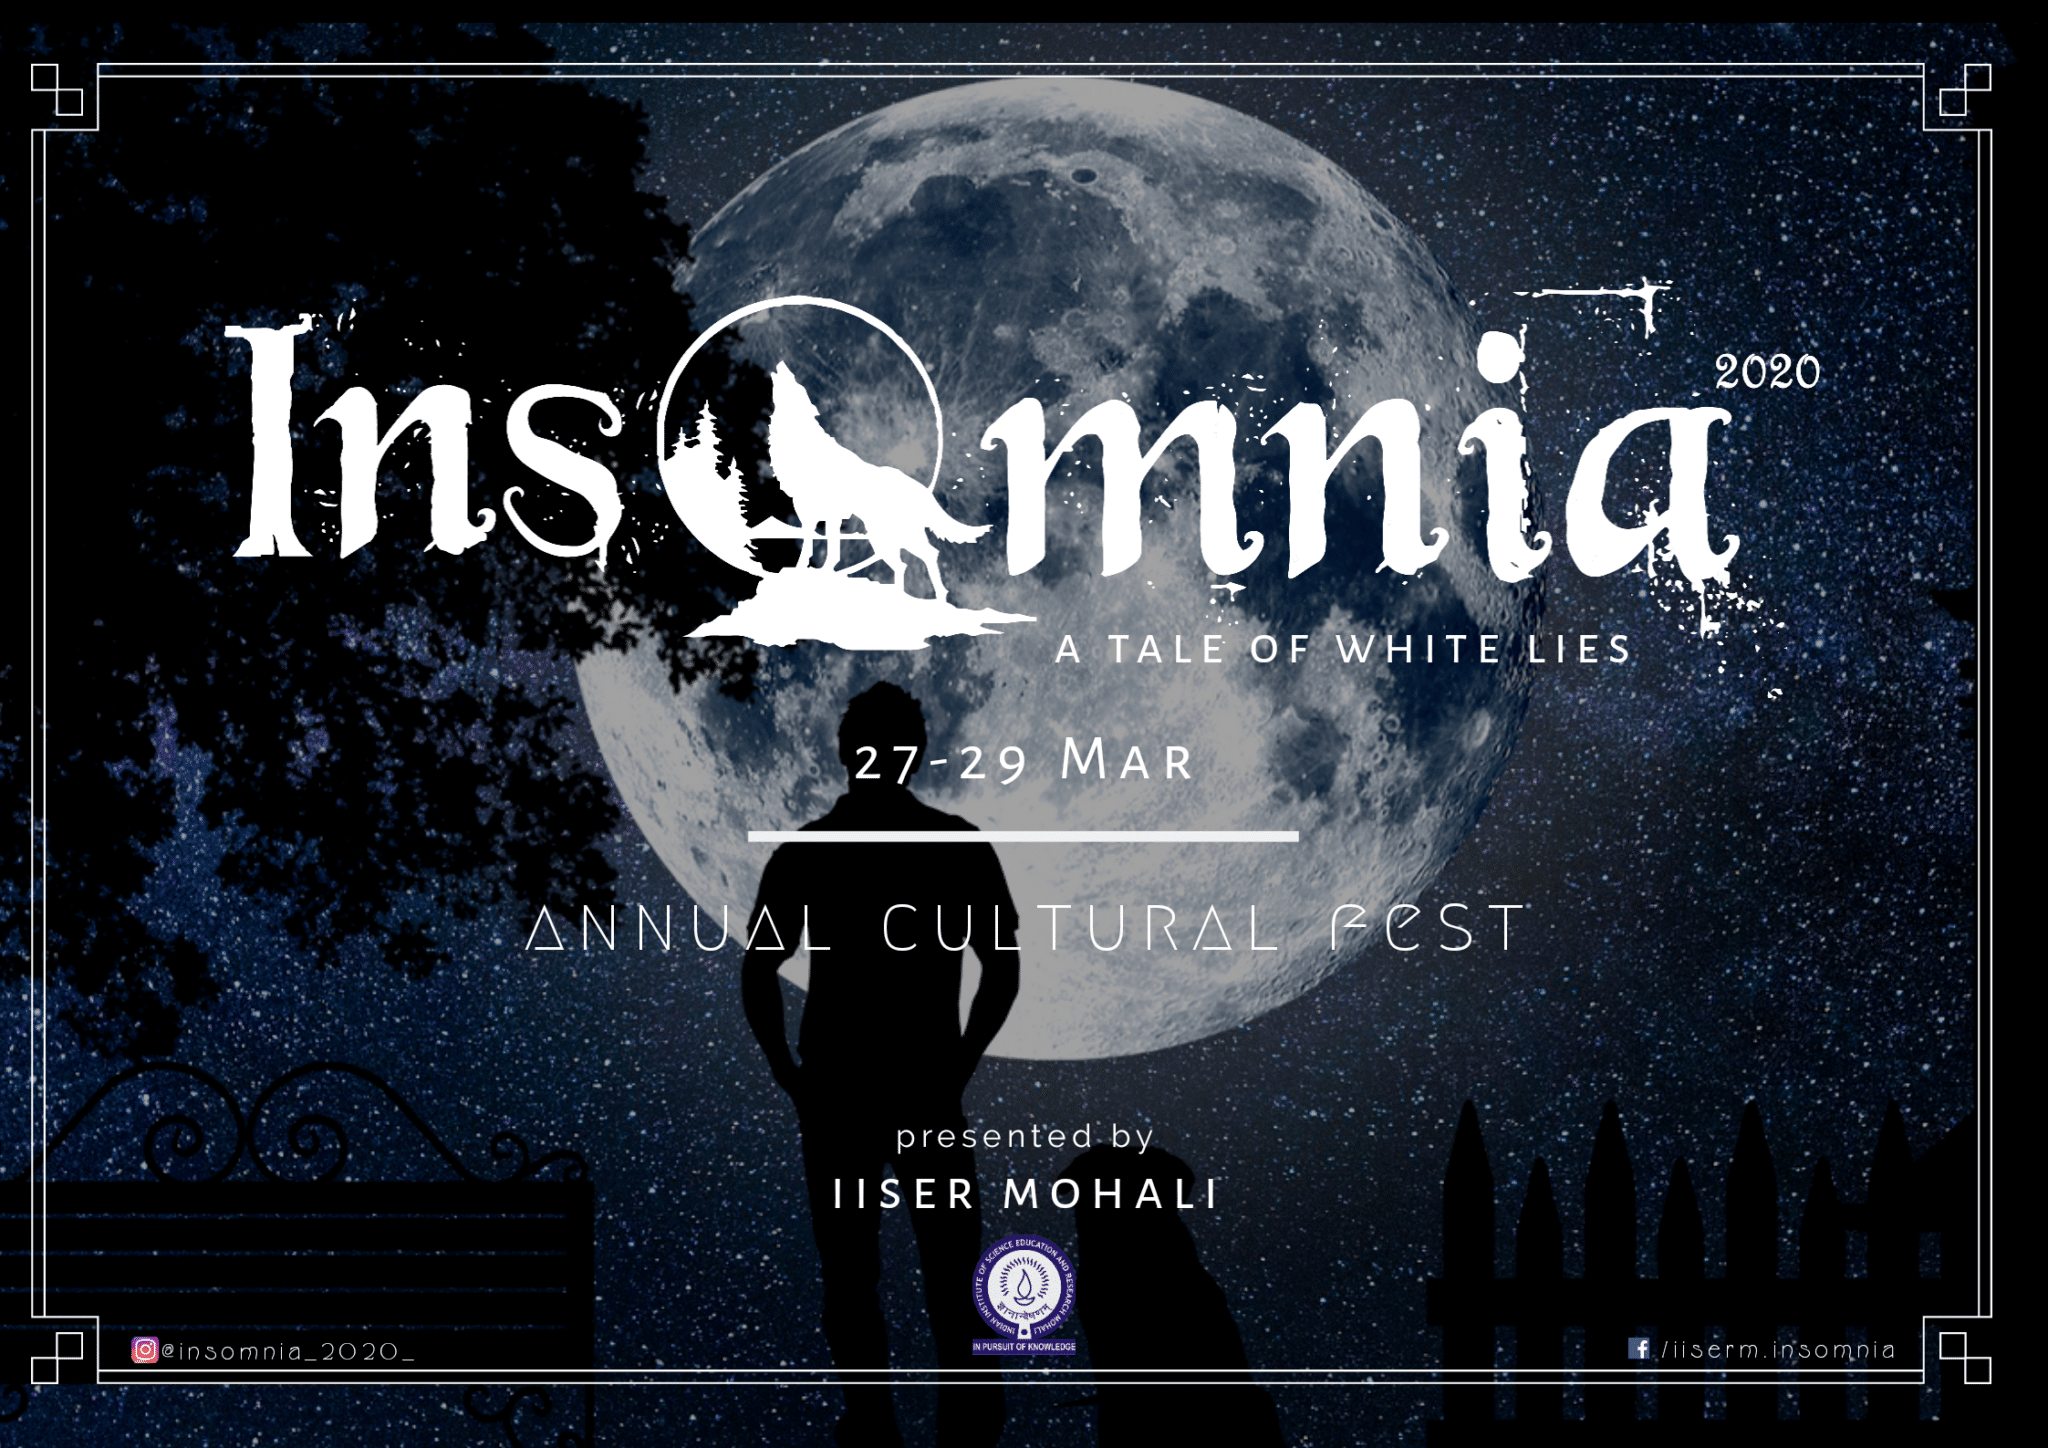 INSOMNIA 2020 | ‘A Tale of White Lies’